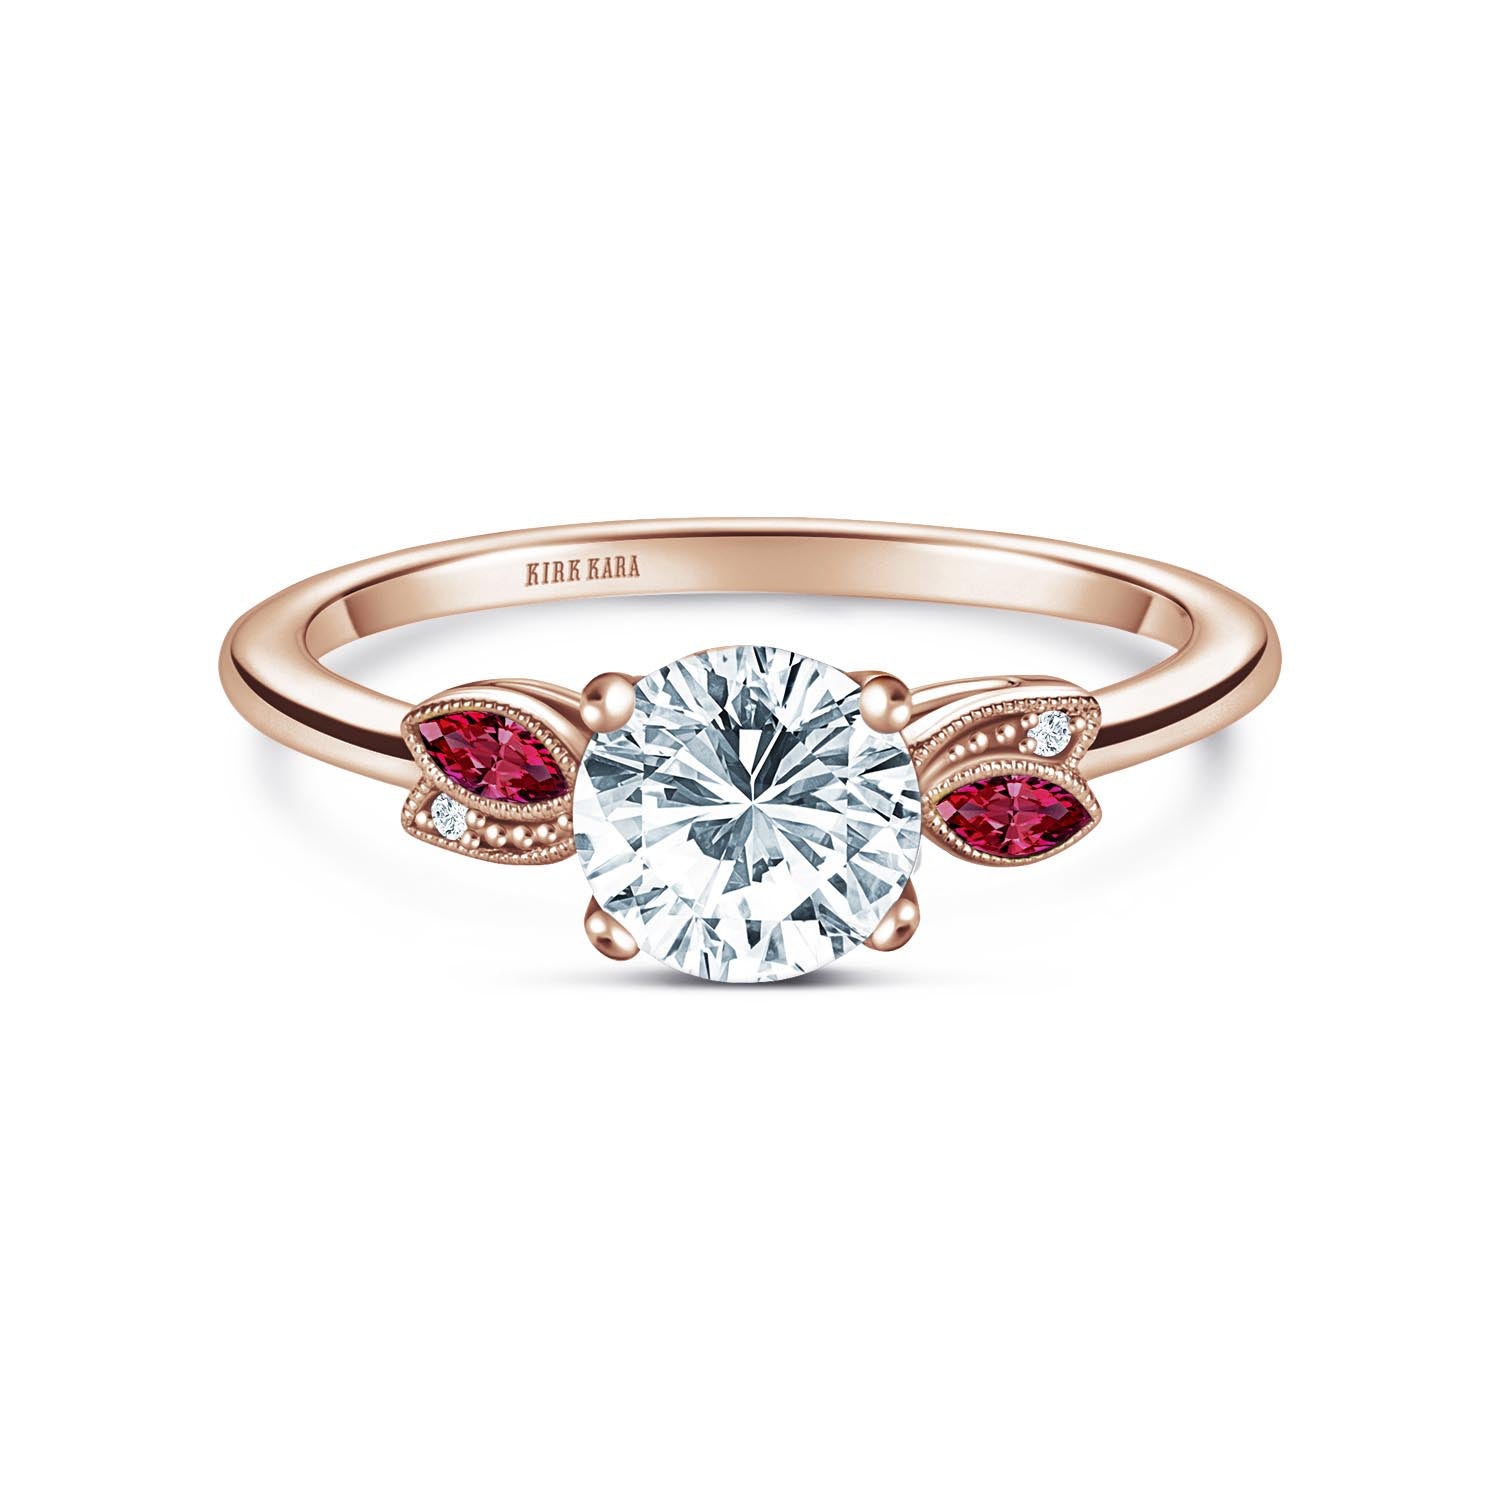 Unique Pear Shaped Lab Diamond Ring With Ruby Accents | Barkev's